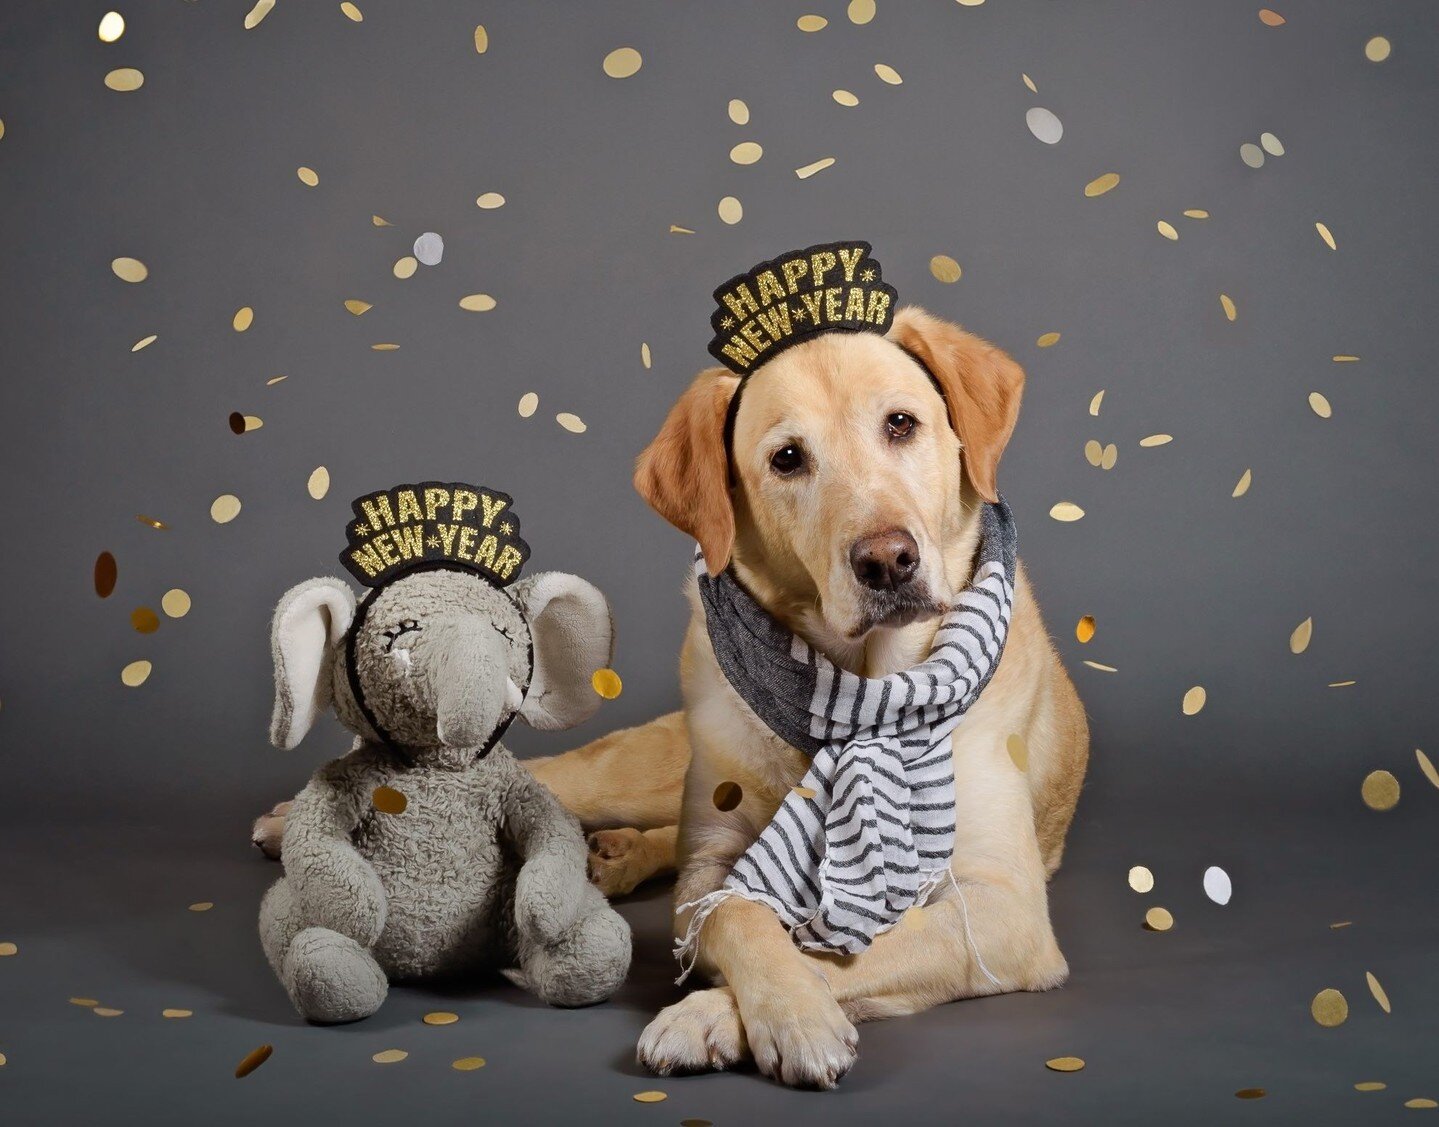 HAPPY NEW YEAR 2024! Excited for another year of building the With Love &amp; Oats dog community and the Lens &amp; Light photography community. Nothing brings me more joy 💛⁠
⁠
This is one of my favorite New Year's photos of Oats. Her memory will co